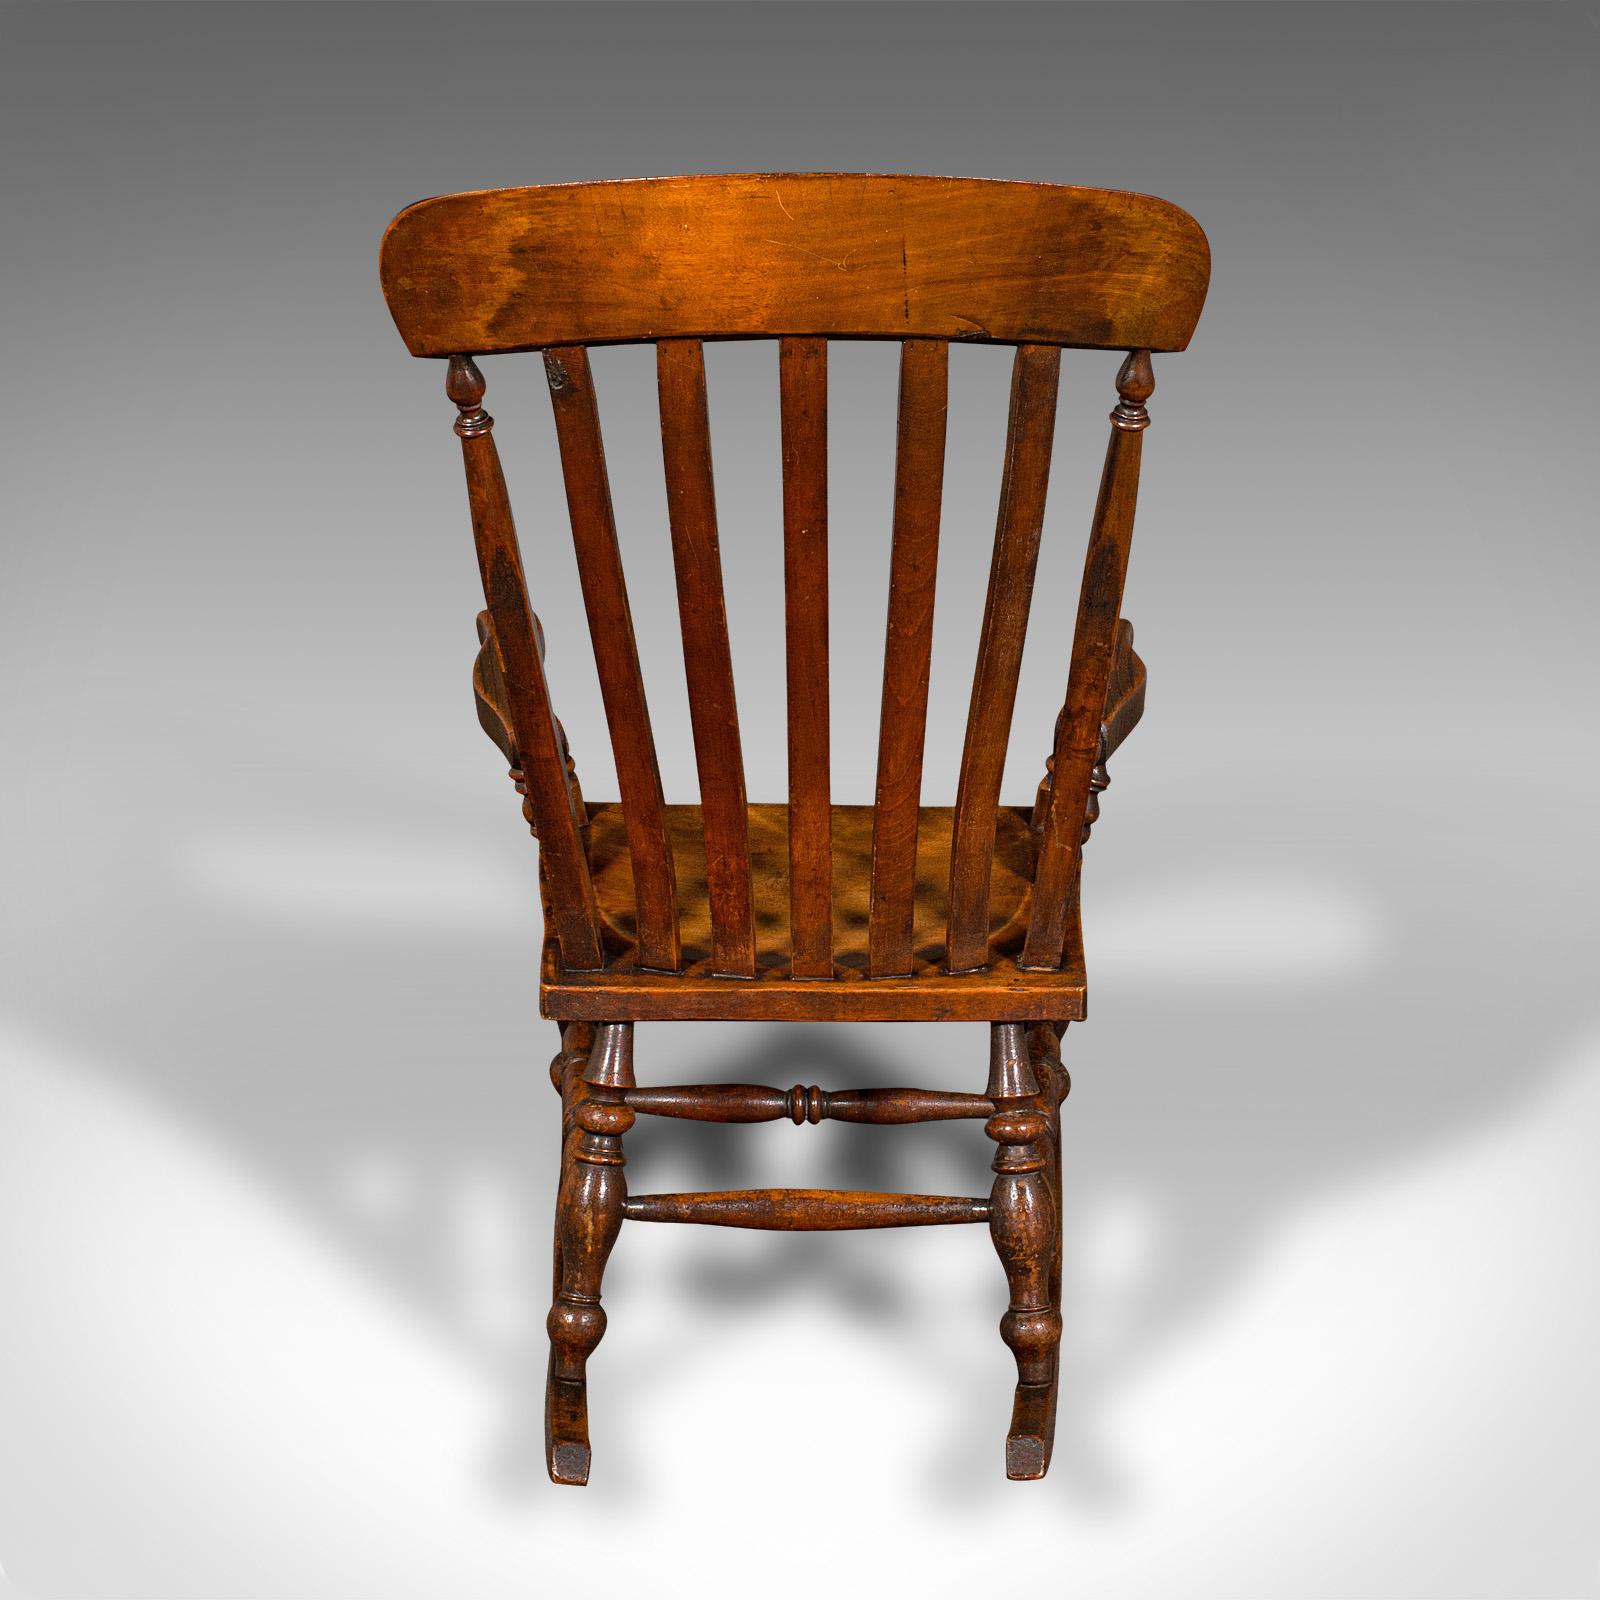 19th Century Antique Lath Back Rocking Chair, English Elm, Beech, Elbow Seat, Victorian, 1880 For Sale